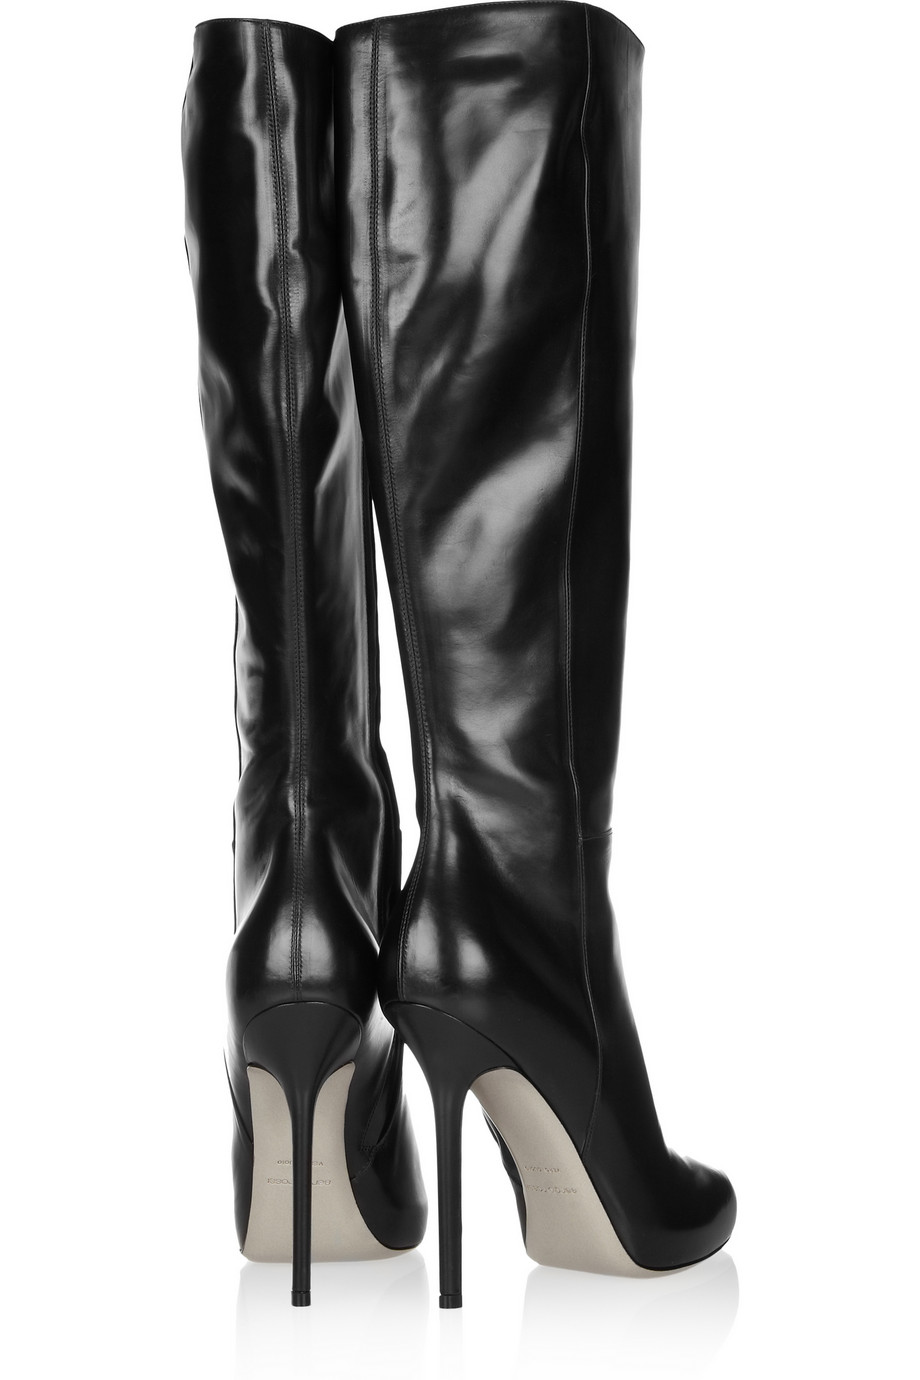 Sergio Rossi Black Leather Boots | Lyst